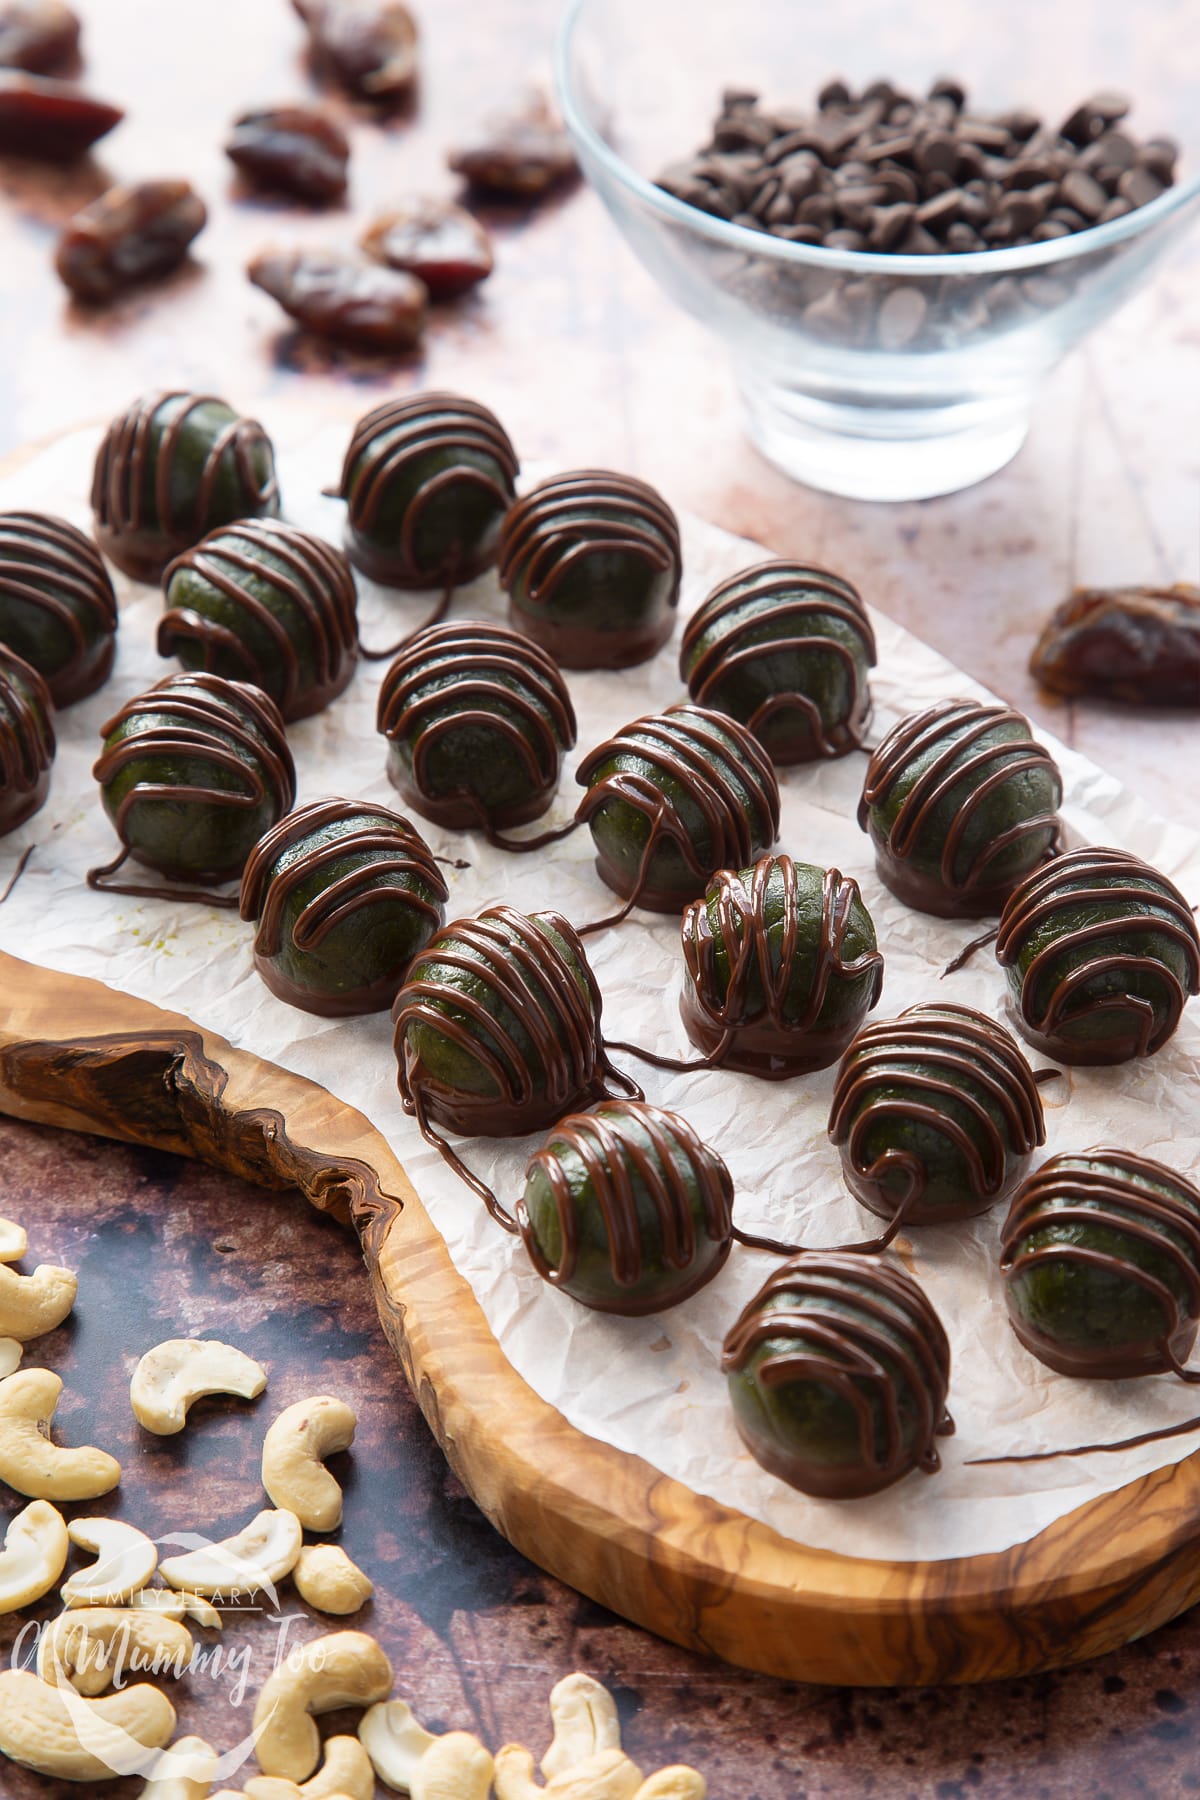 Matcha protein balls on a wooden board lined with baking paper. The balls are dark green and have been drizzled with dark chocolate.